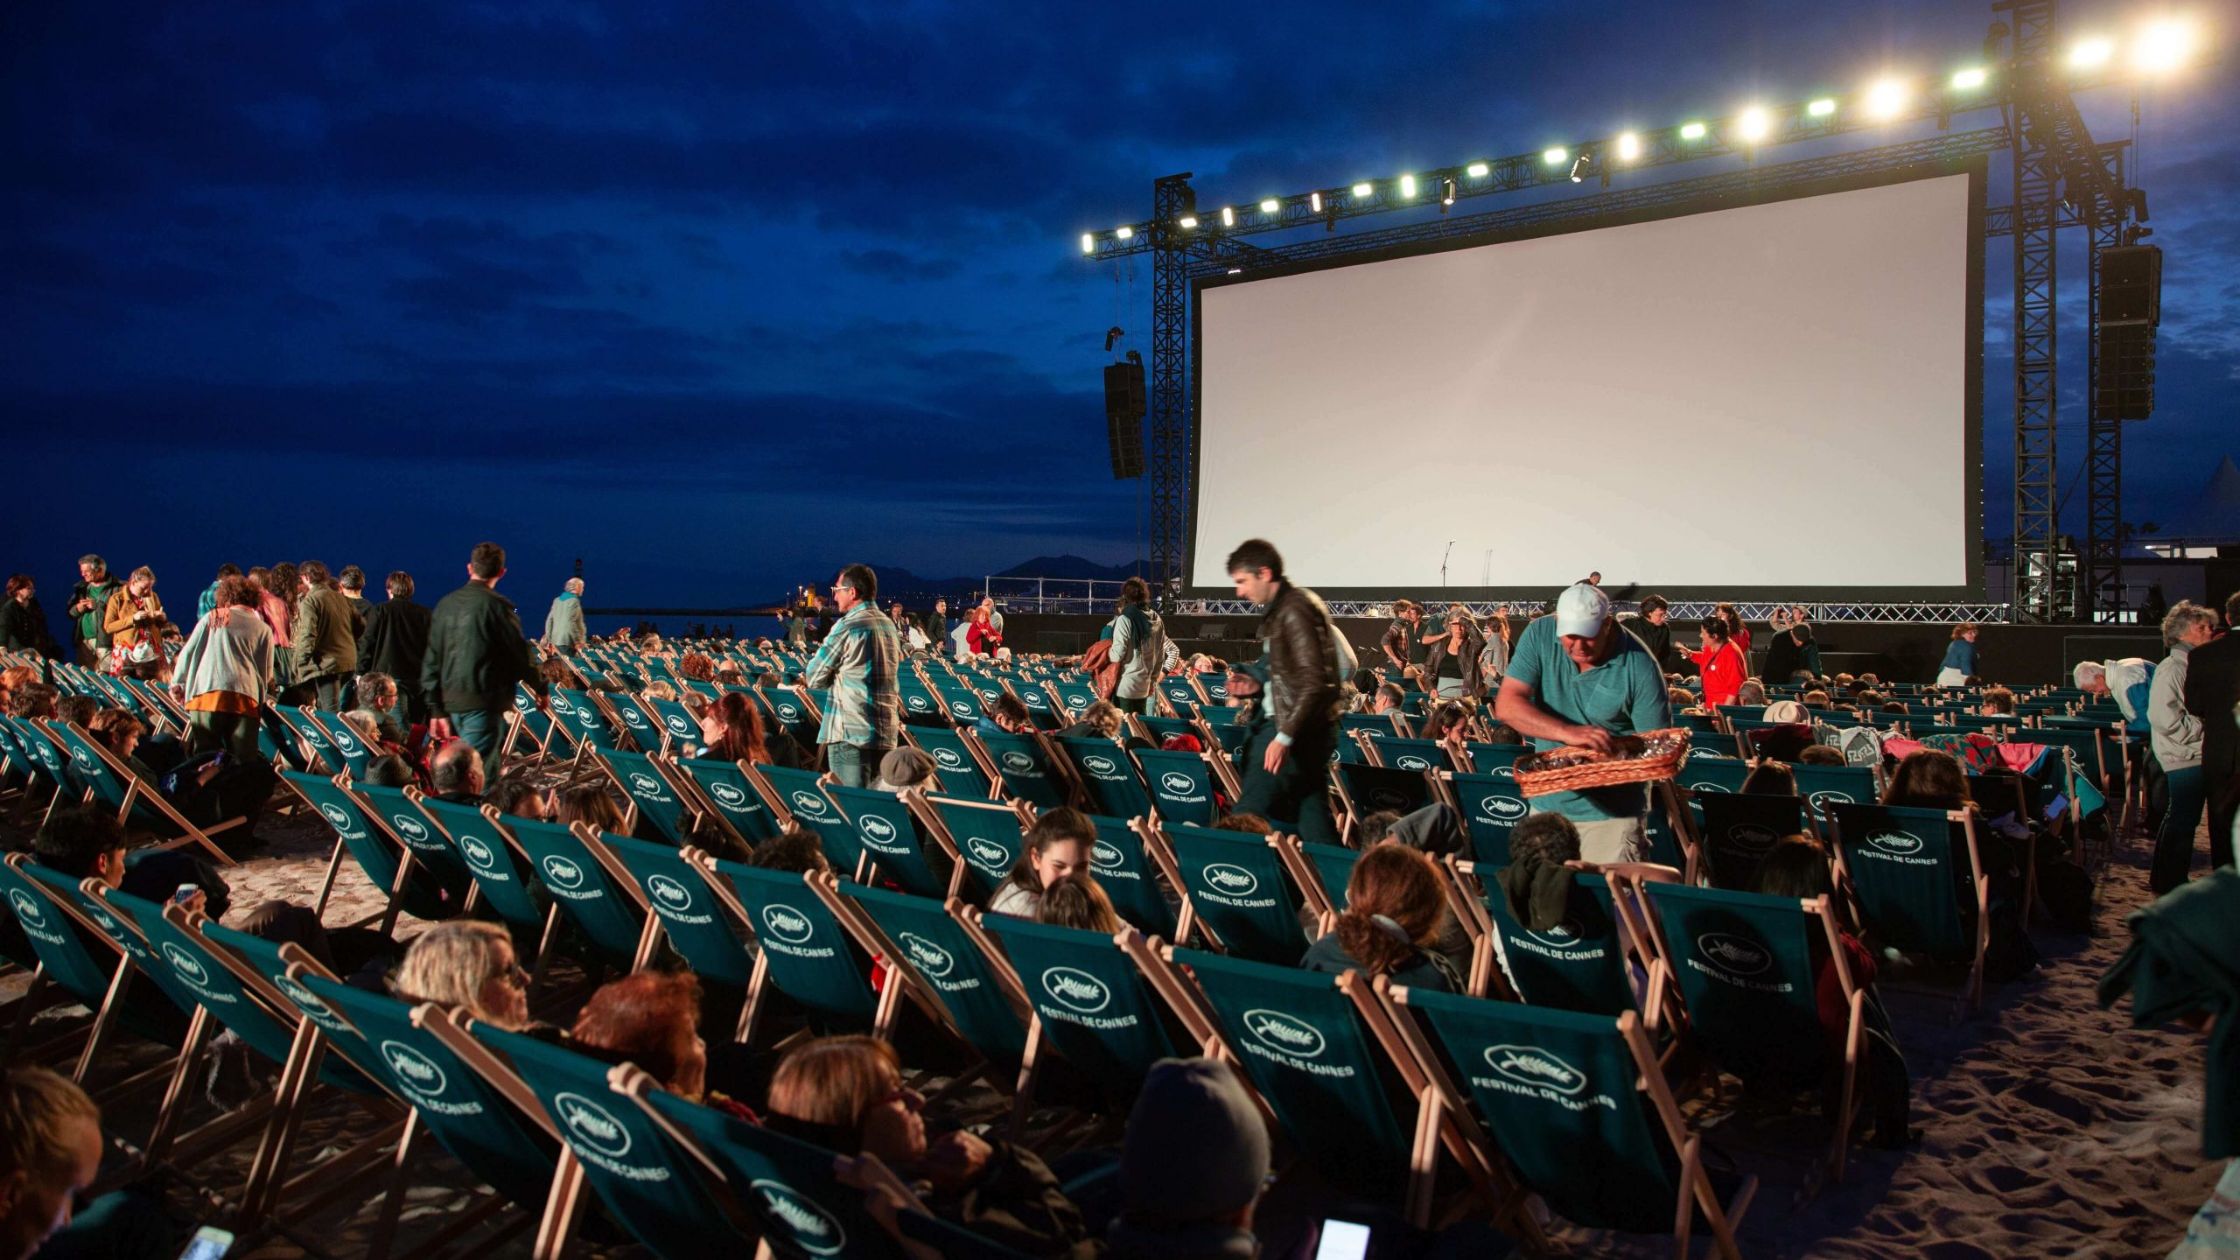 How do outdoor movie screens differ from indoor movie screens?